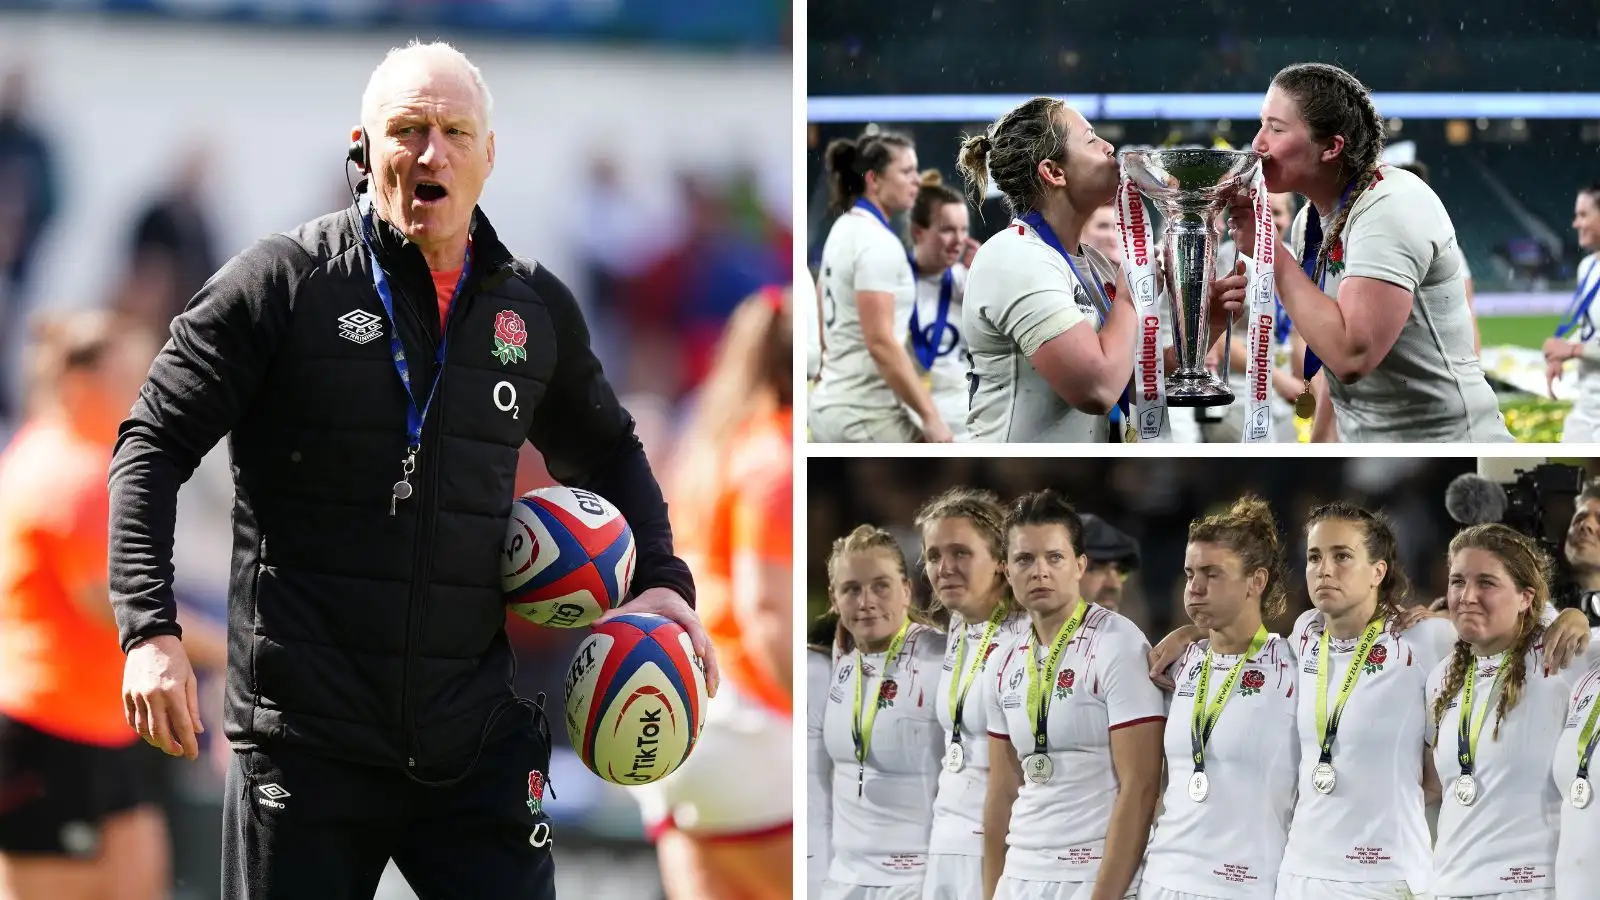 Simon Middleton bowed out in style as England head coach on Saturday, with the Red Roses claiming another Six Nations Grand Slam title.